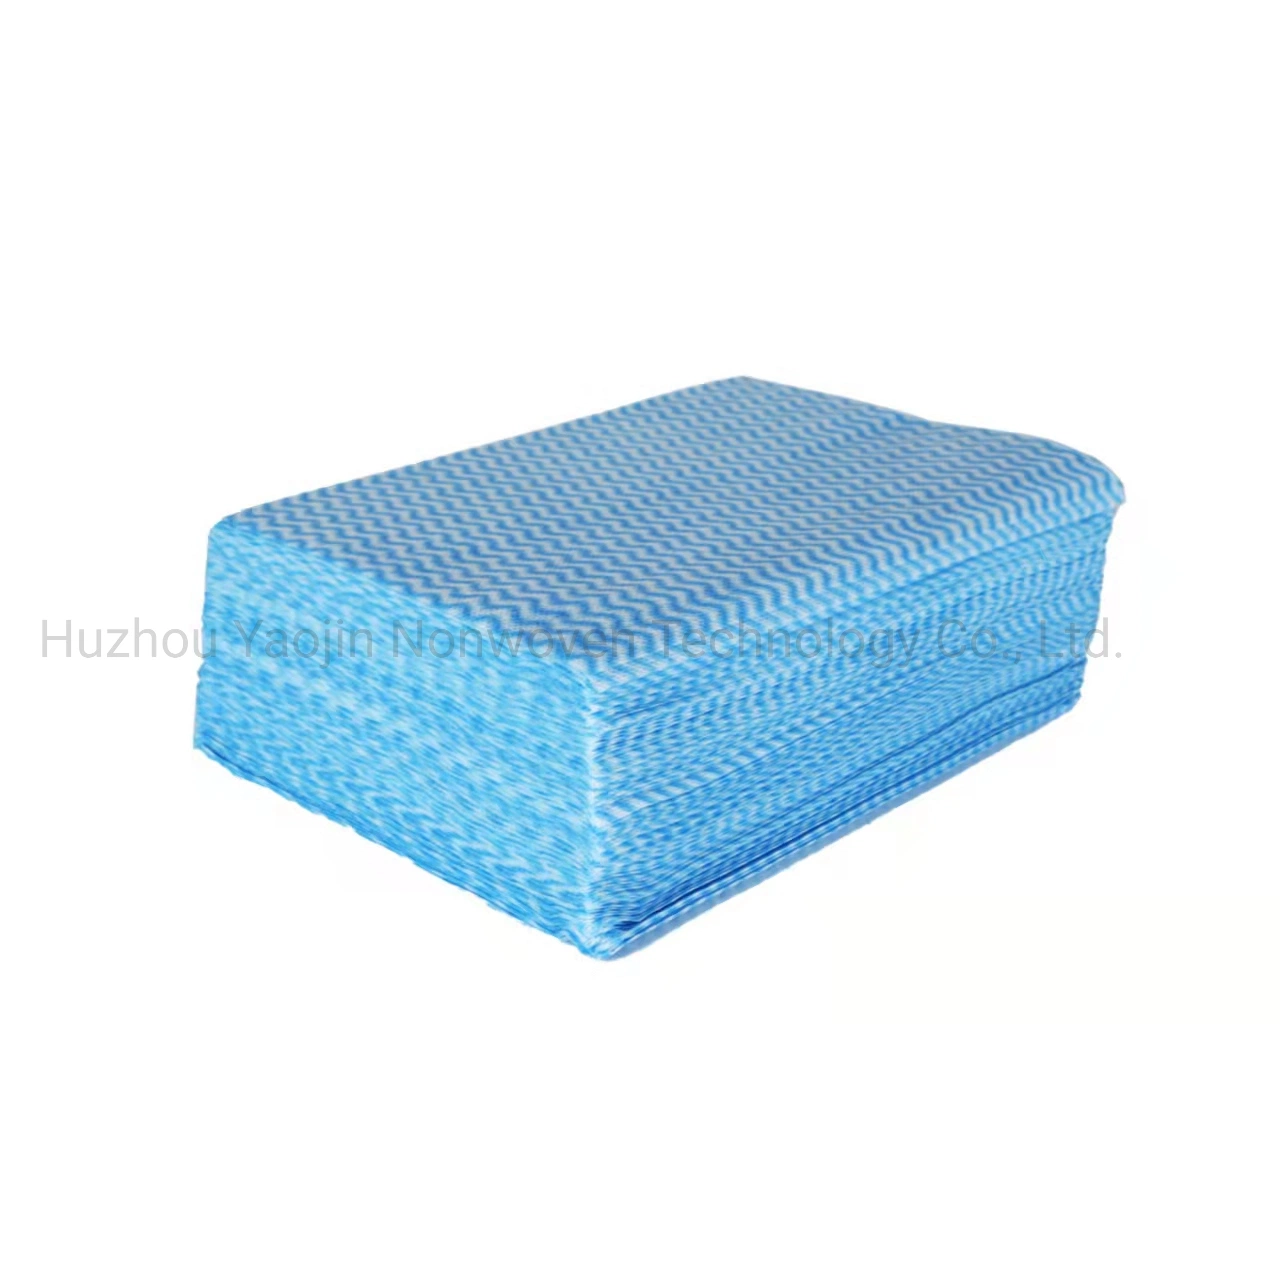 China Manufacturer Wholesale/Supplier Heavy Duty Industry or Home and Kitchen Dry Wipes and Cleaning Cloths in Roll